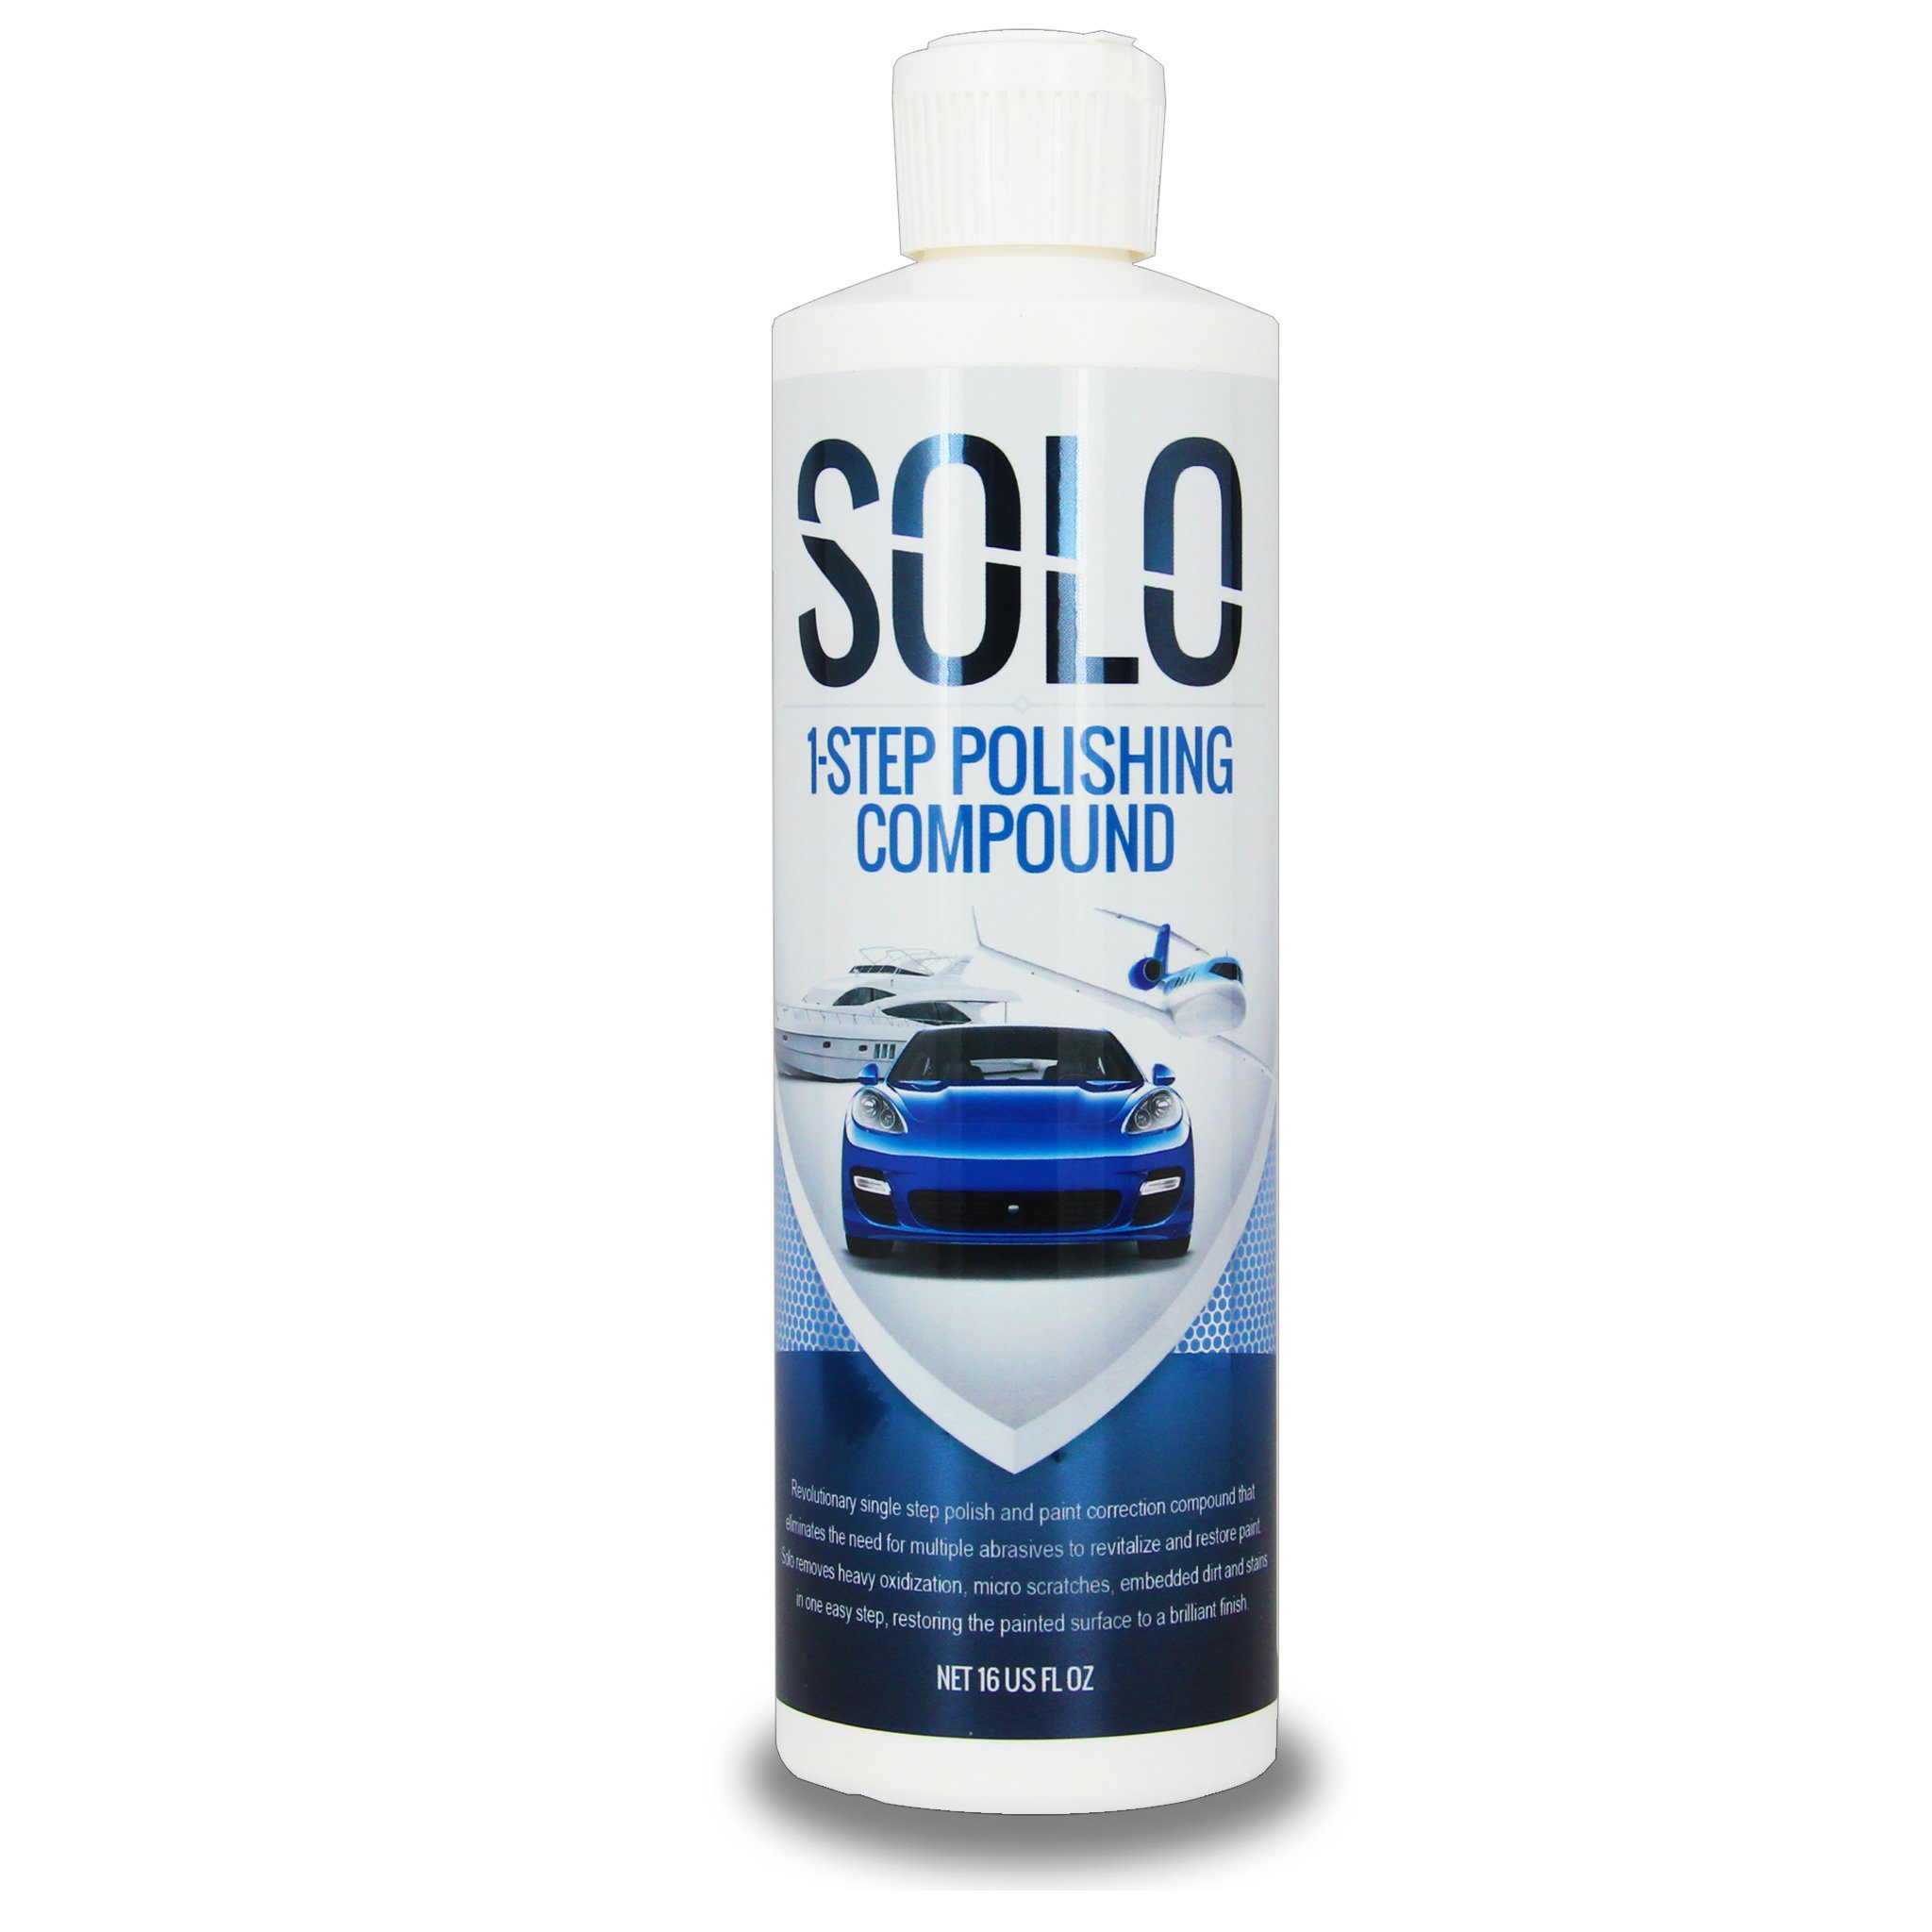 Solo-1 Paint Correction Compound for Planes, Cars & More